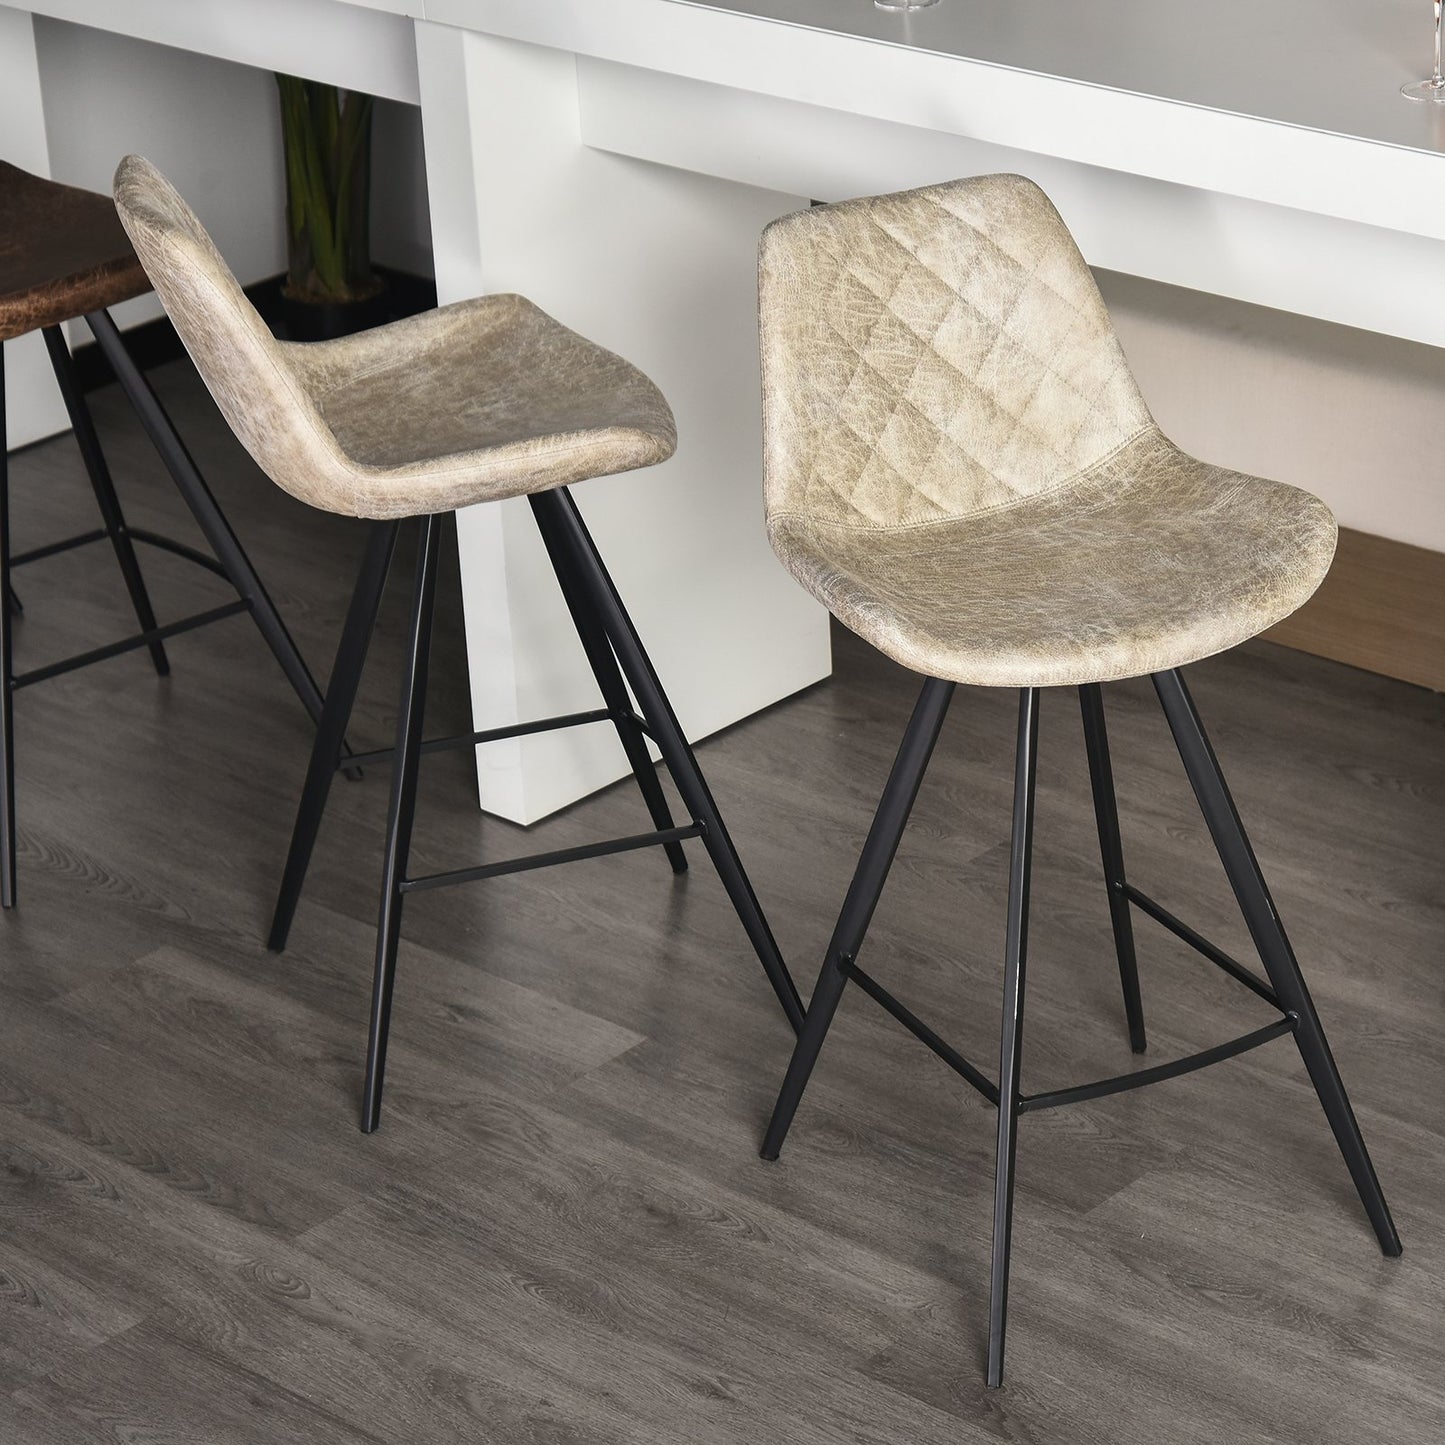 HOMCOM PU Leather Upholstered Twin - Pair Kitchen Bar Stools Grey